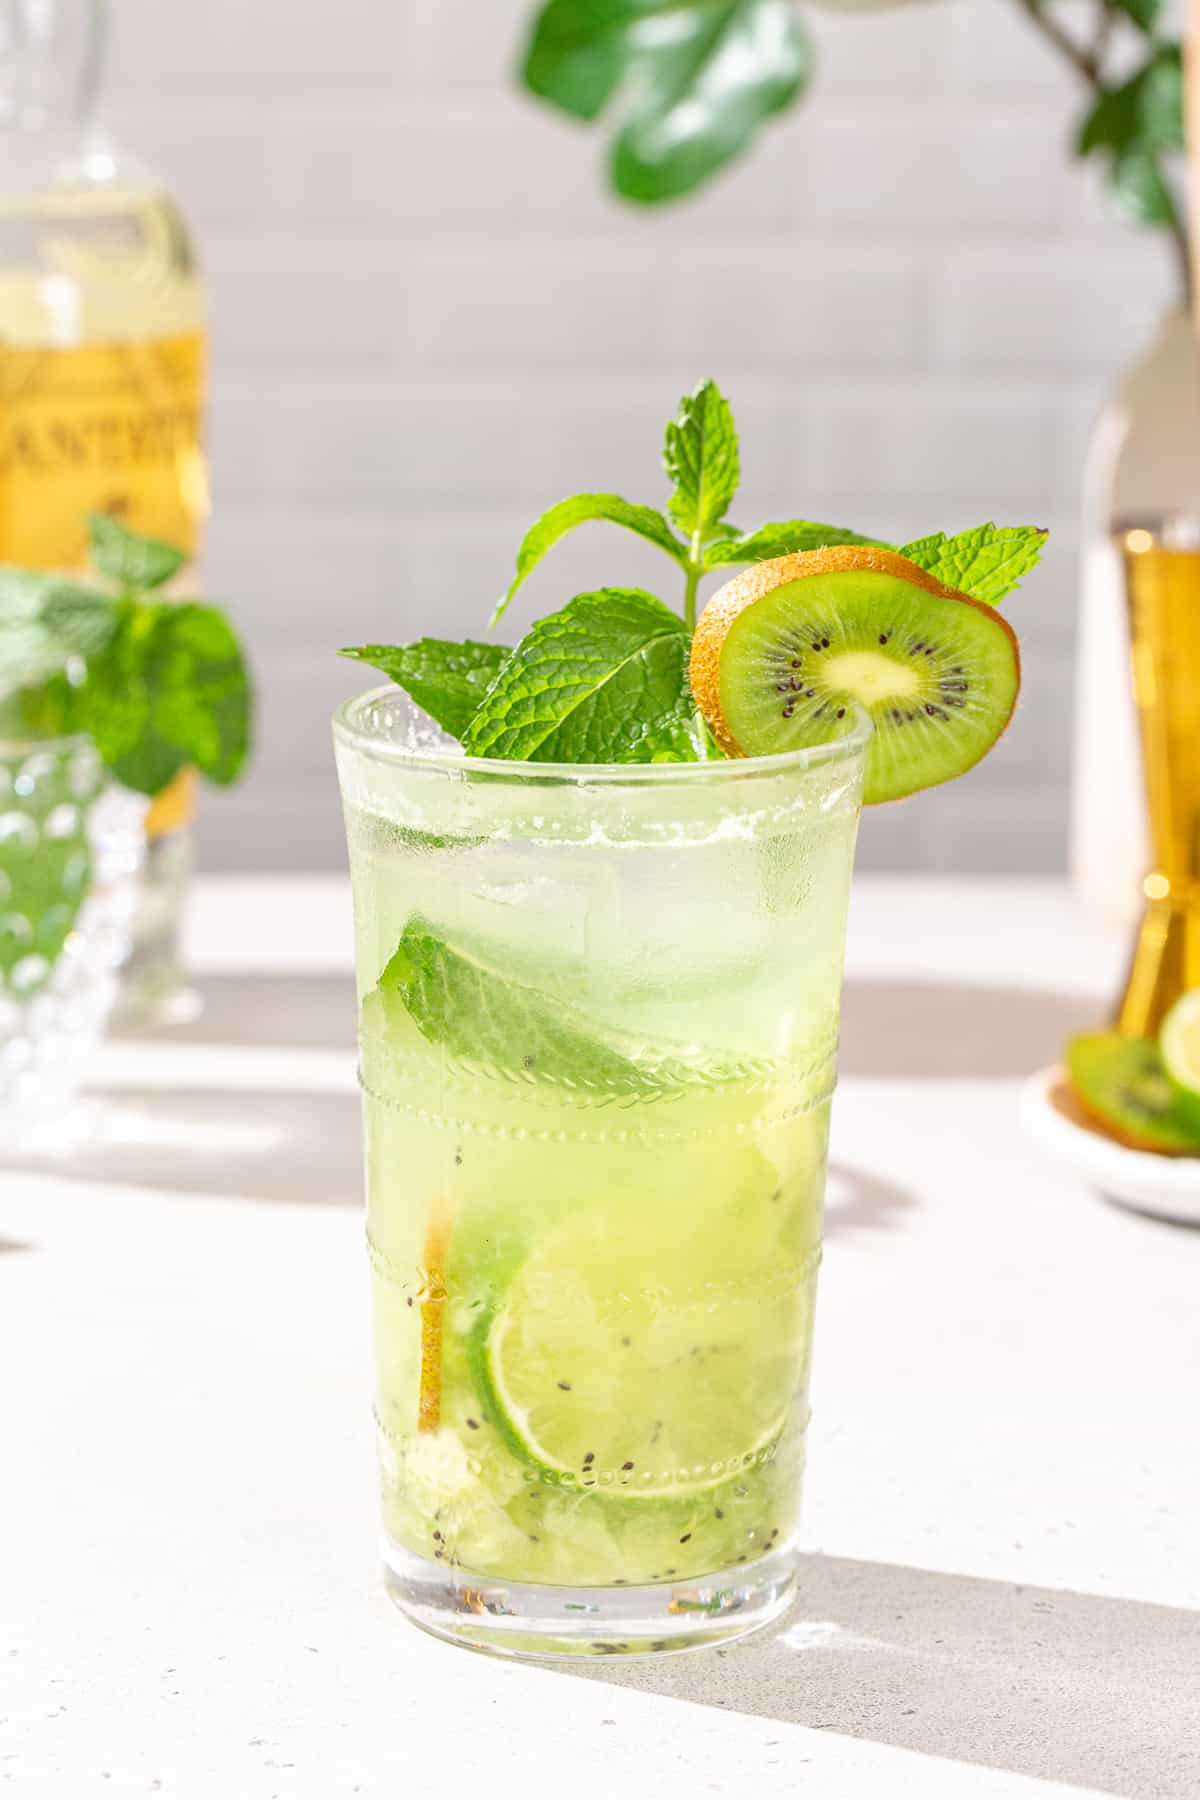 Side view of Kiwi Mojito cocktail in a tall glass. The drink is garnished with a kiwi slice, mint sprig and lime slice. In the background are ingredients used in the drink, including rum, mint and lime, as well as a jigger.